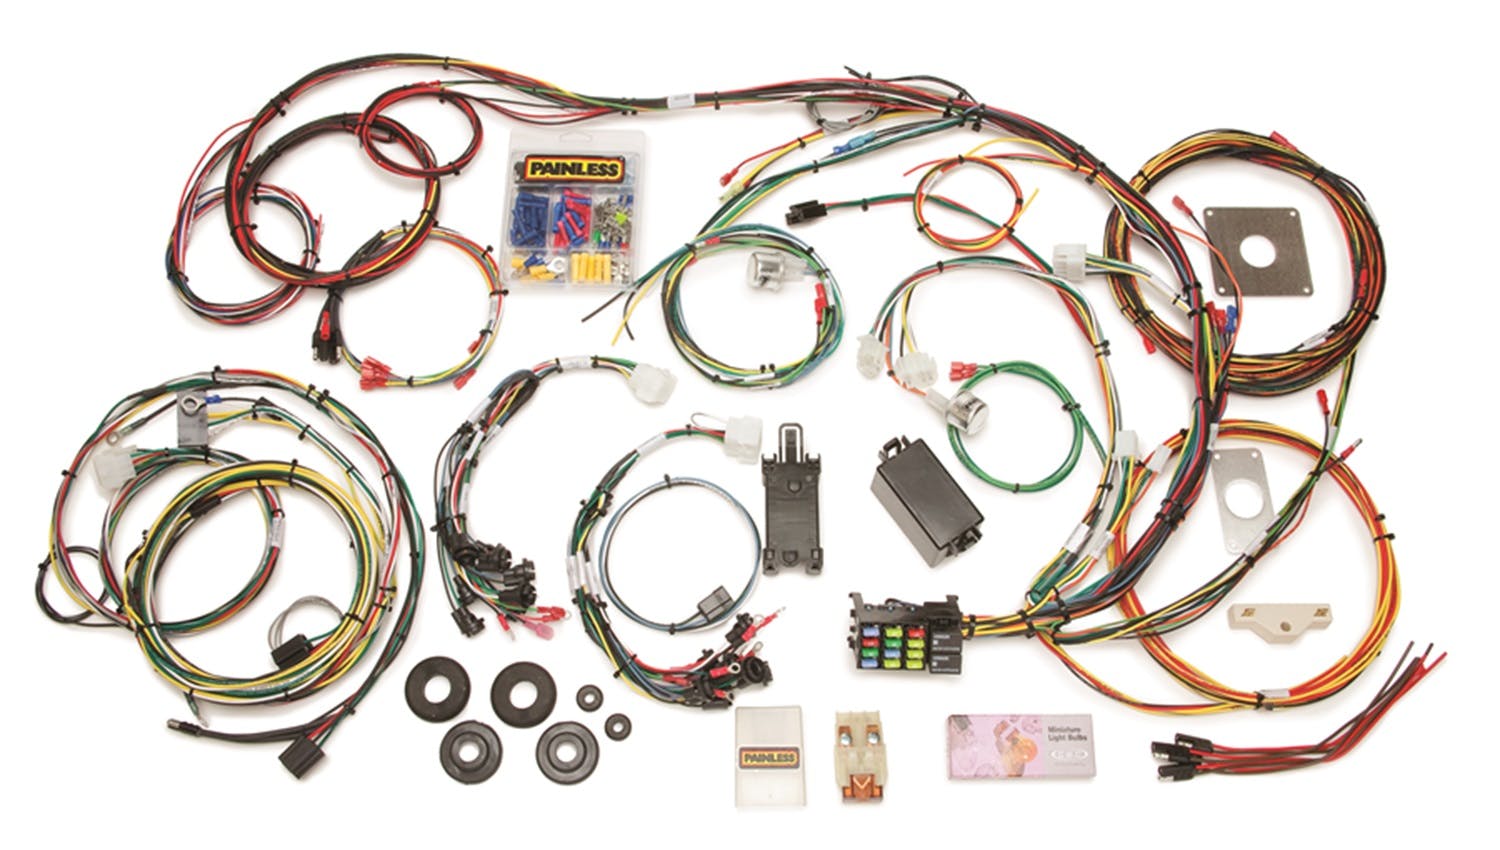 Painless 20120 22 Circuit Chassis Wiring Harness